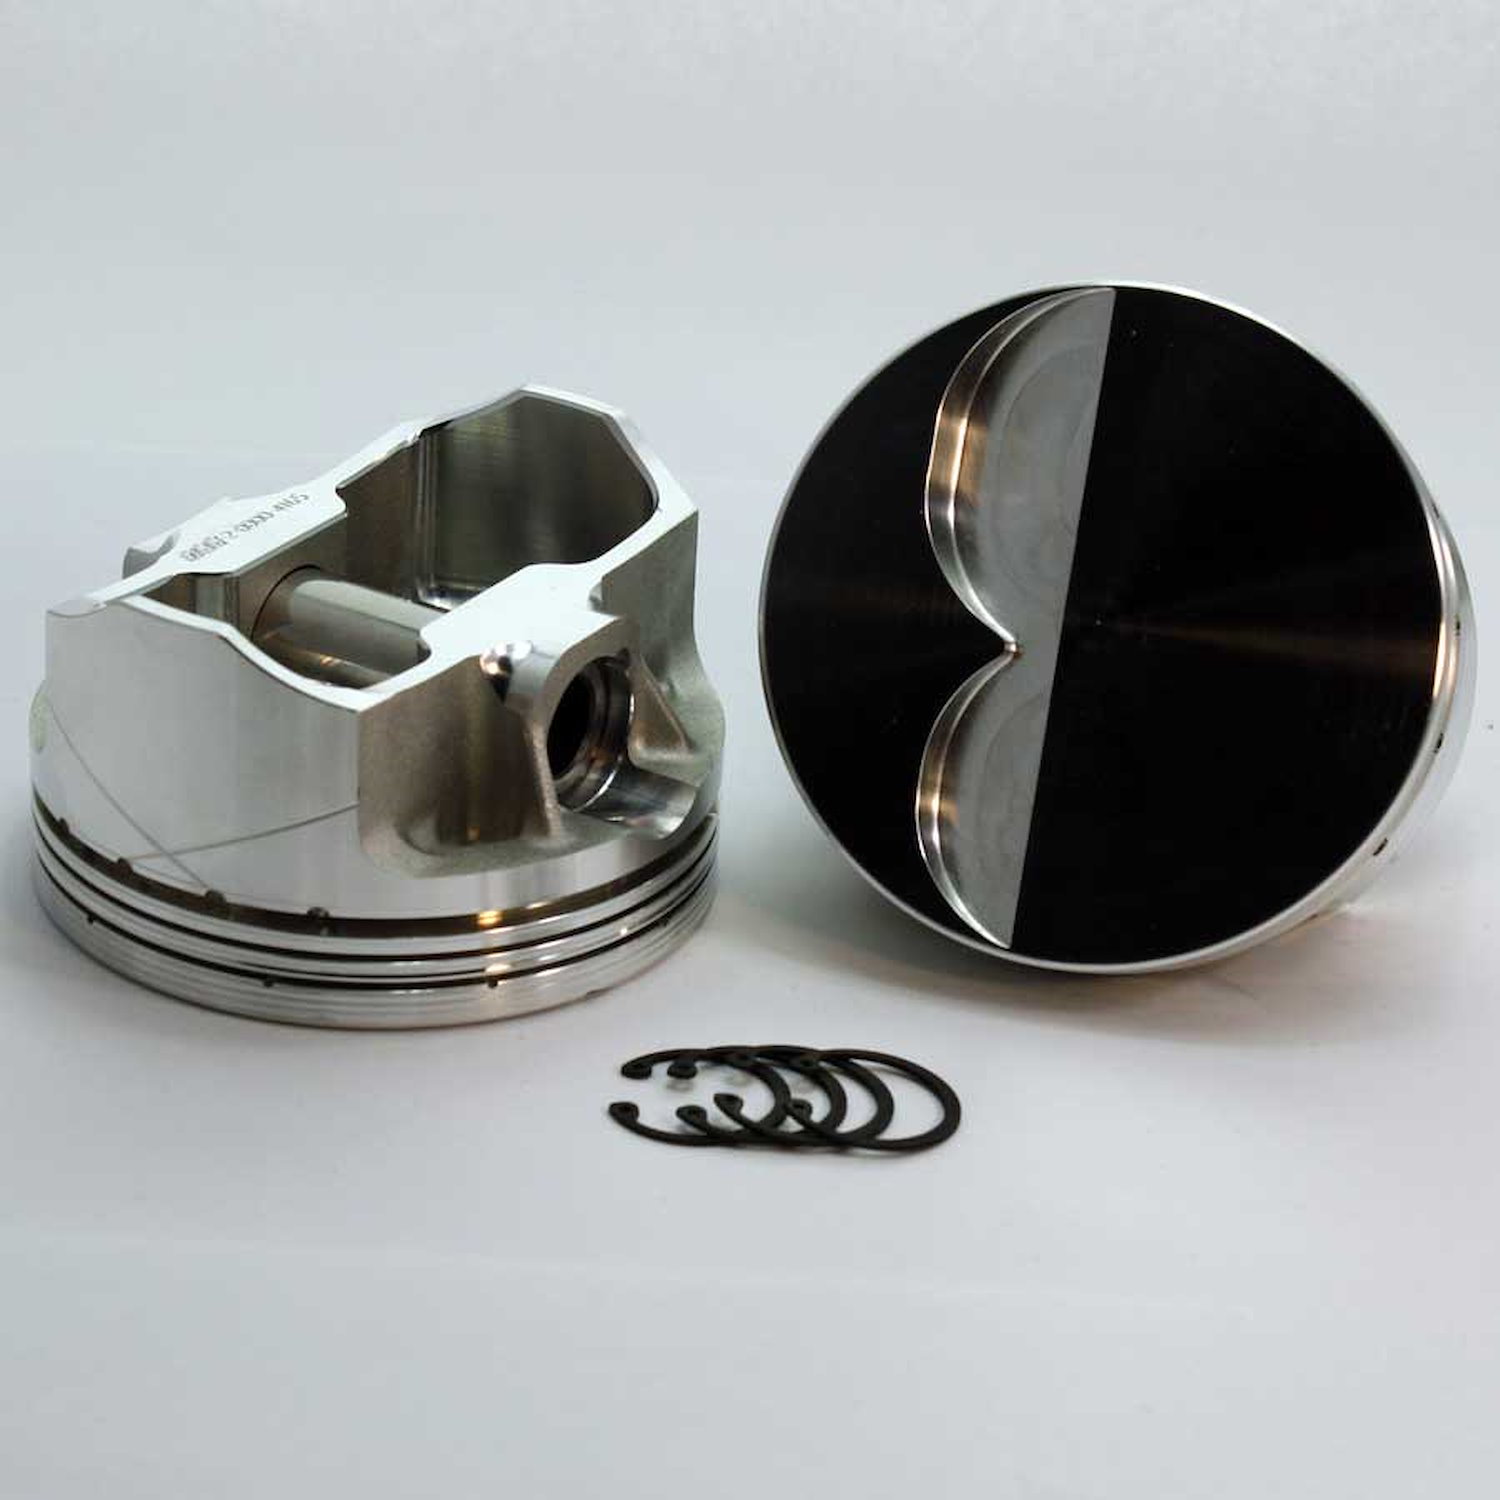 3-3400-4040 FX-Series Flat Top Piston Set for 1962-2001 Small Block Ford 289-302, 4.040 in. Bore, -4cc Volume [OEM Stroke]